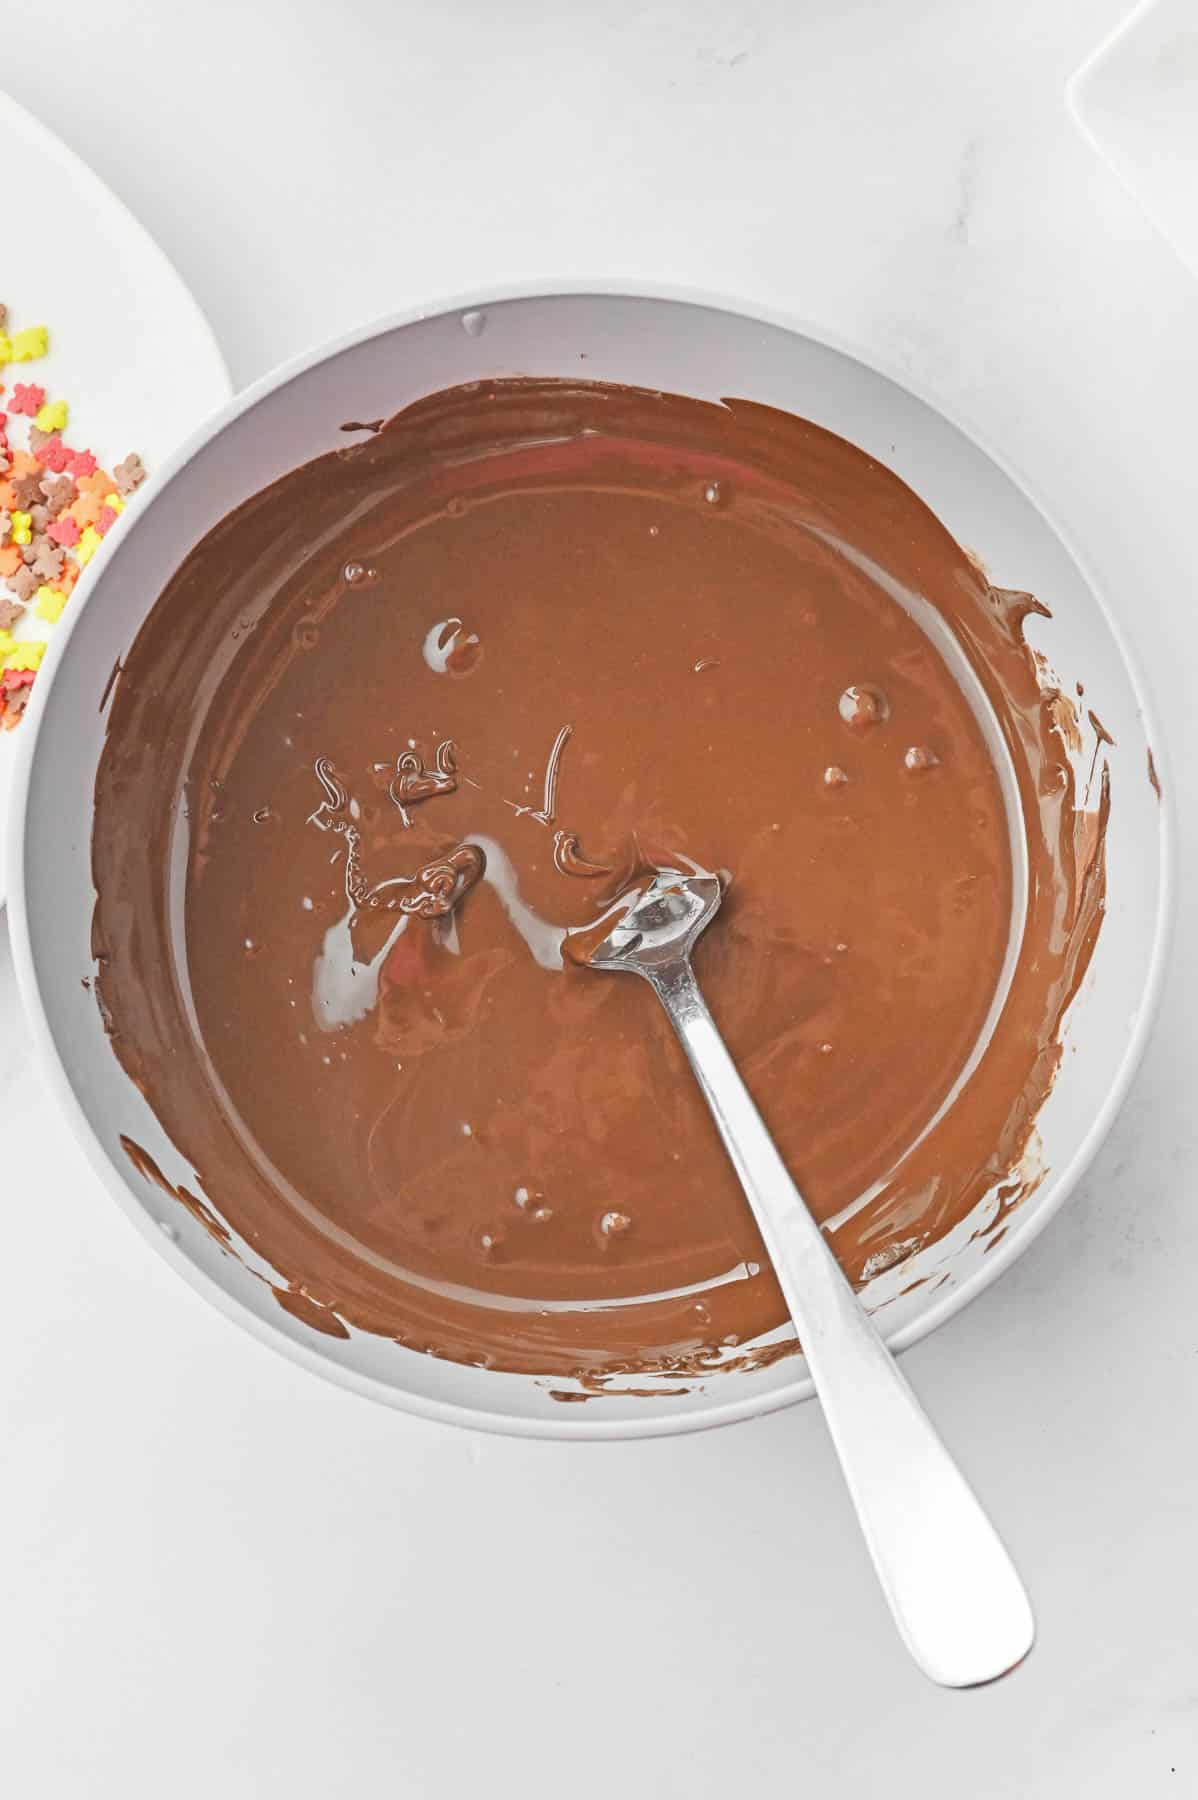 A bowl of melted chocolate with a spoon in it.